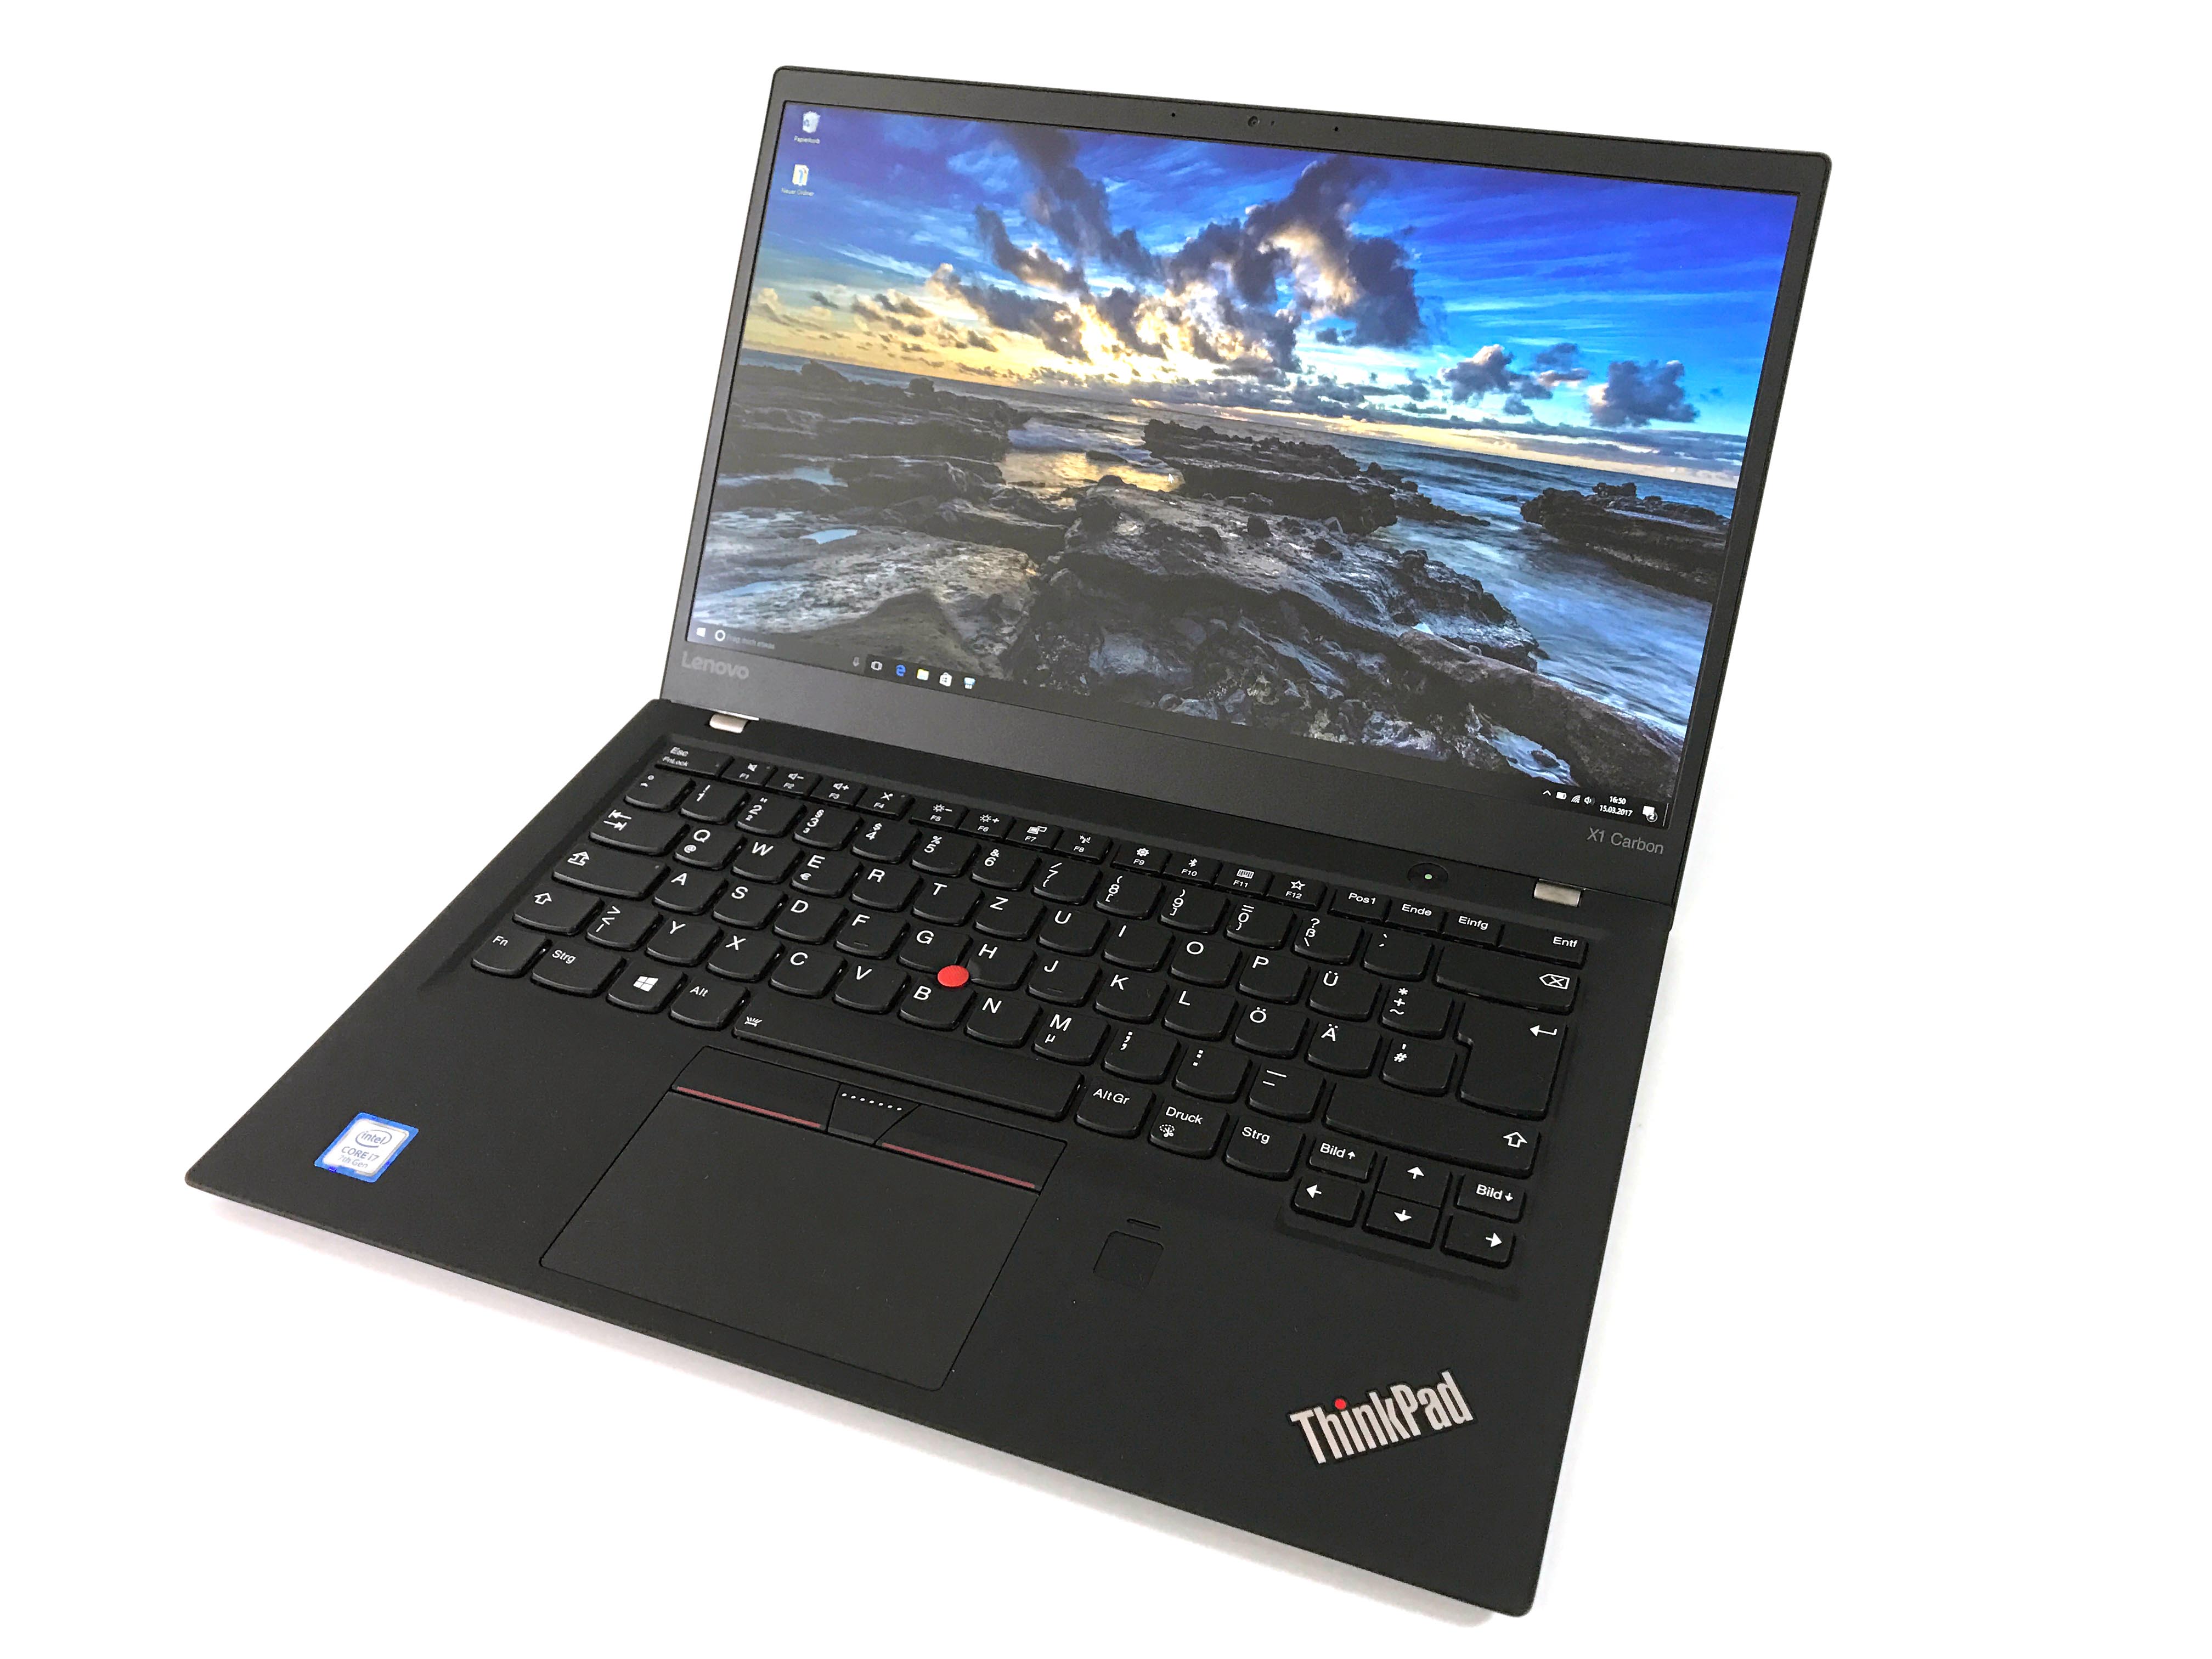 ThinkPad X1 Carbon 2017 i7, Review - NotebookCheck.net Reviews